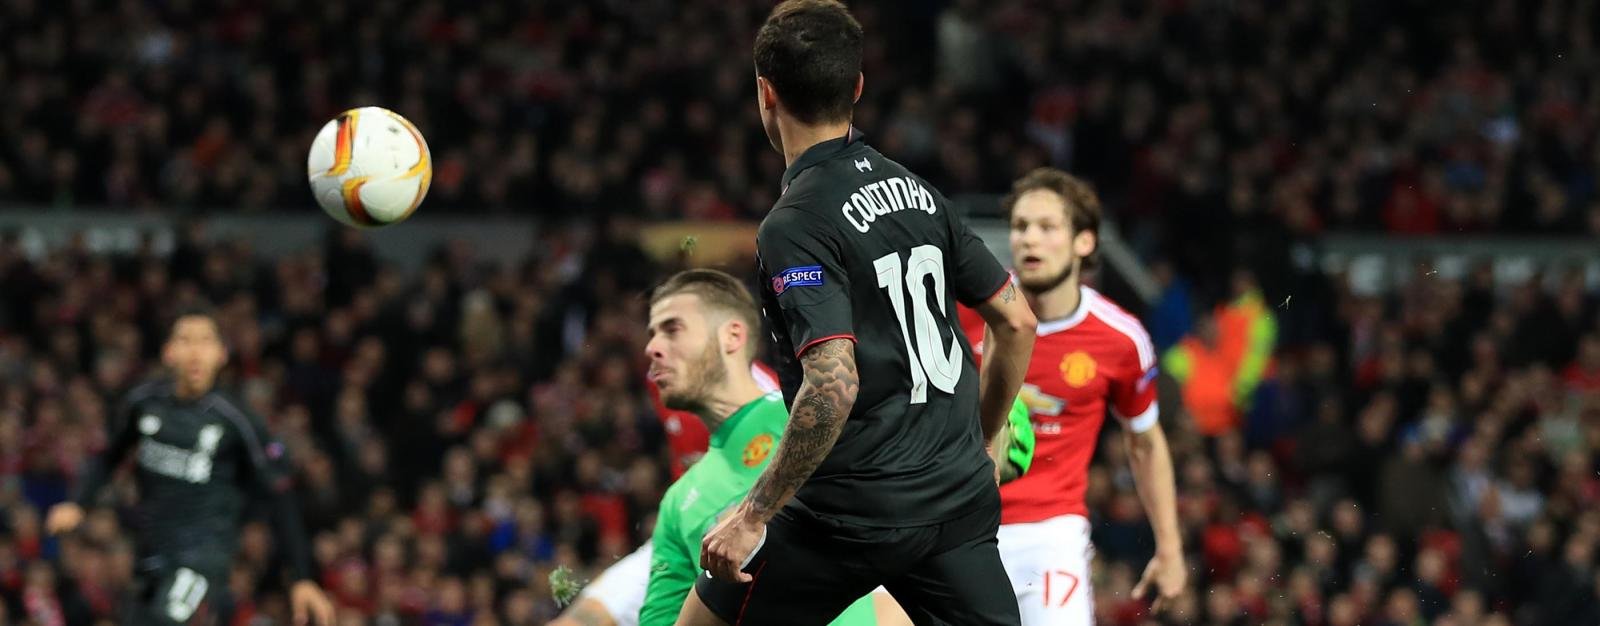 Europa League Round-Up: Liverpool draw with United to progress, while Spurs crash out